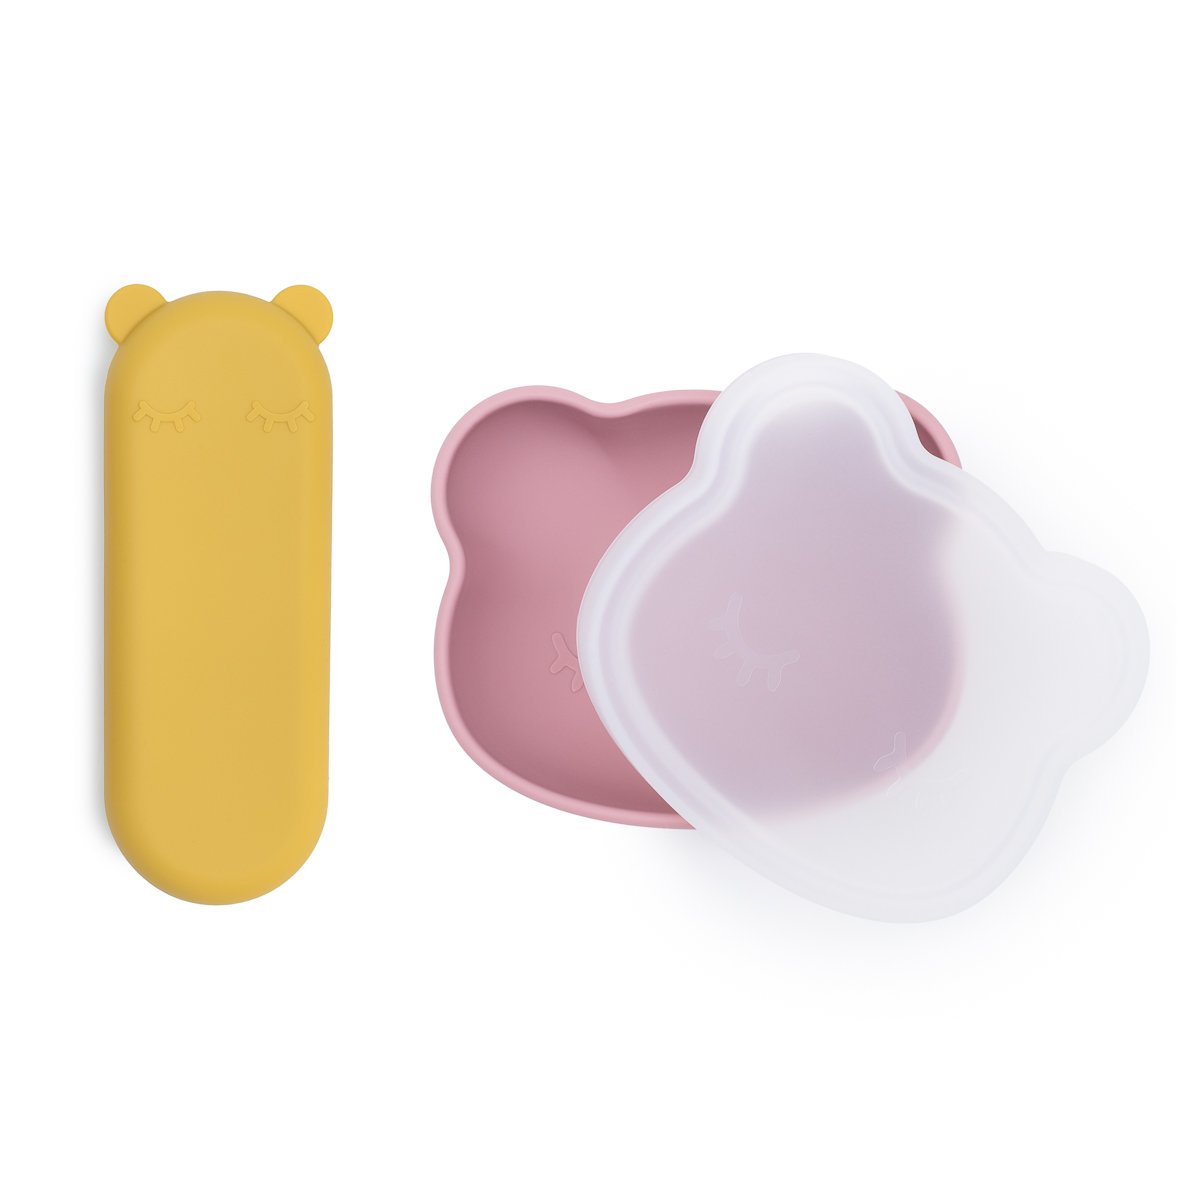 Feedie Fork and Spoon Silicone Set for a Baby, Yellow